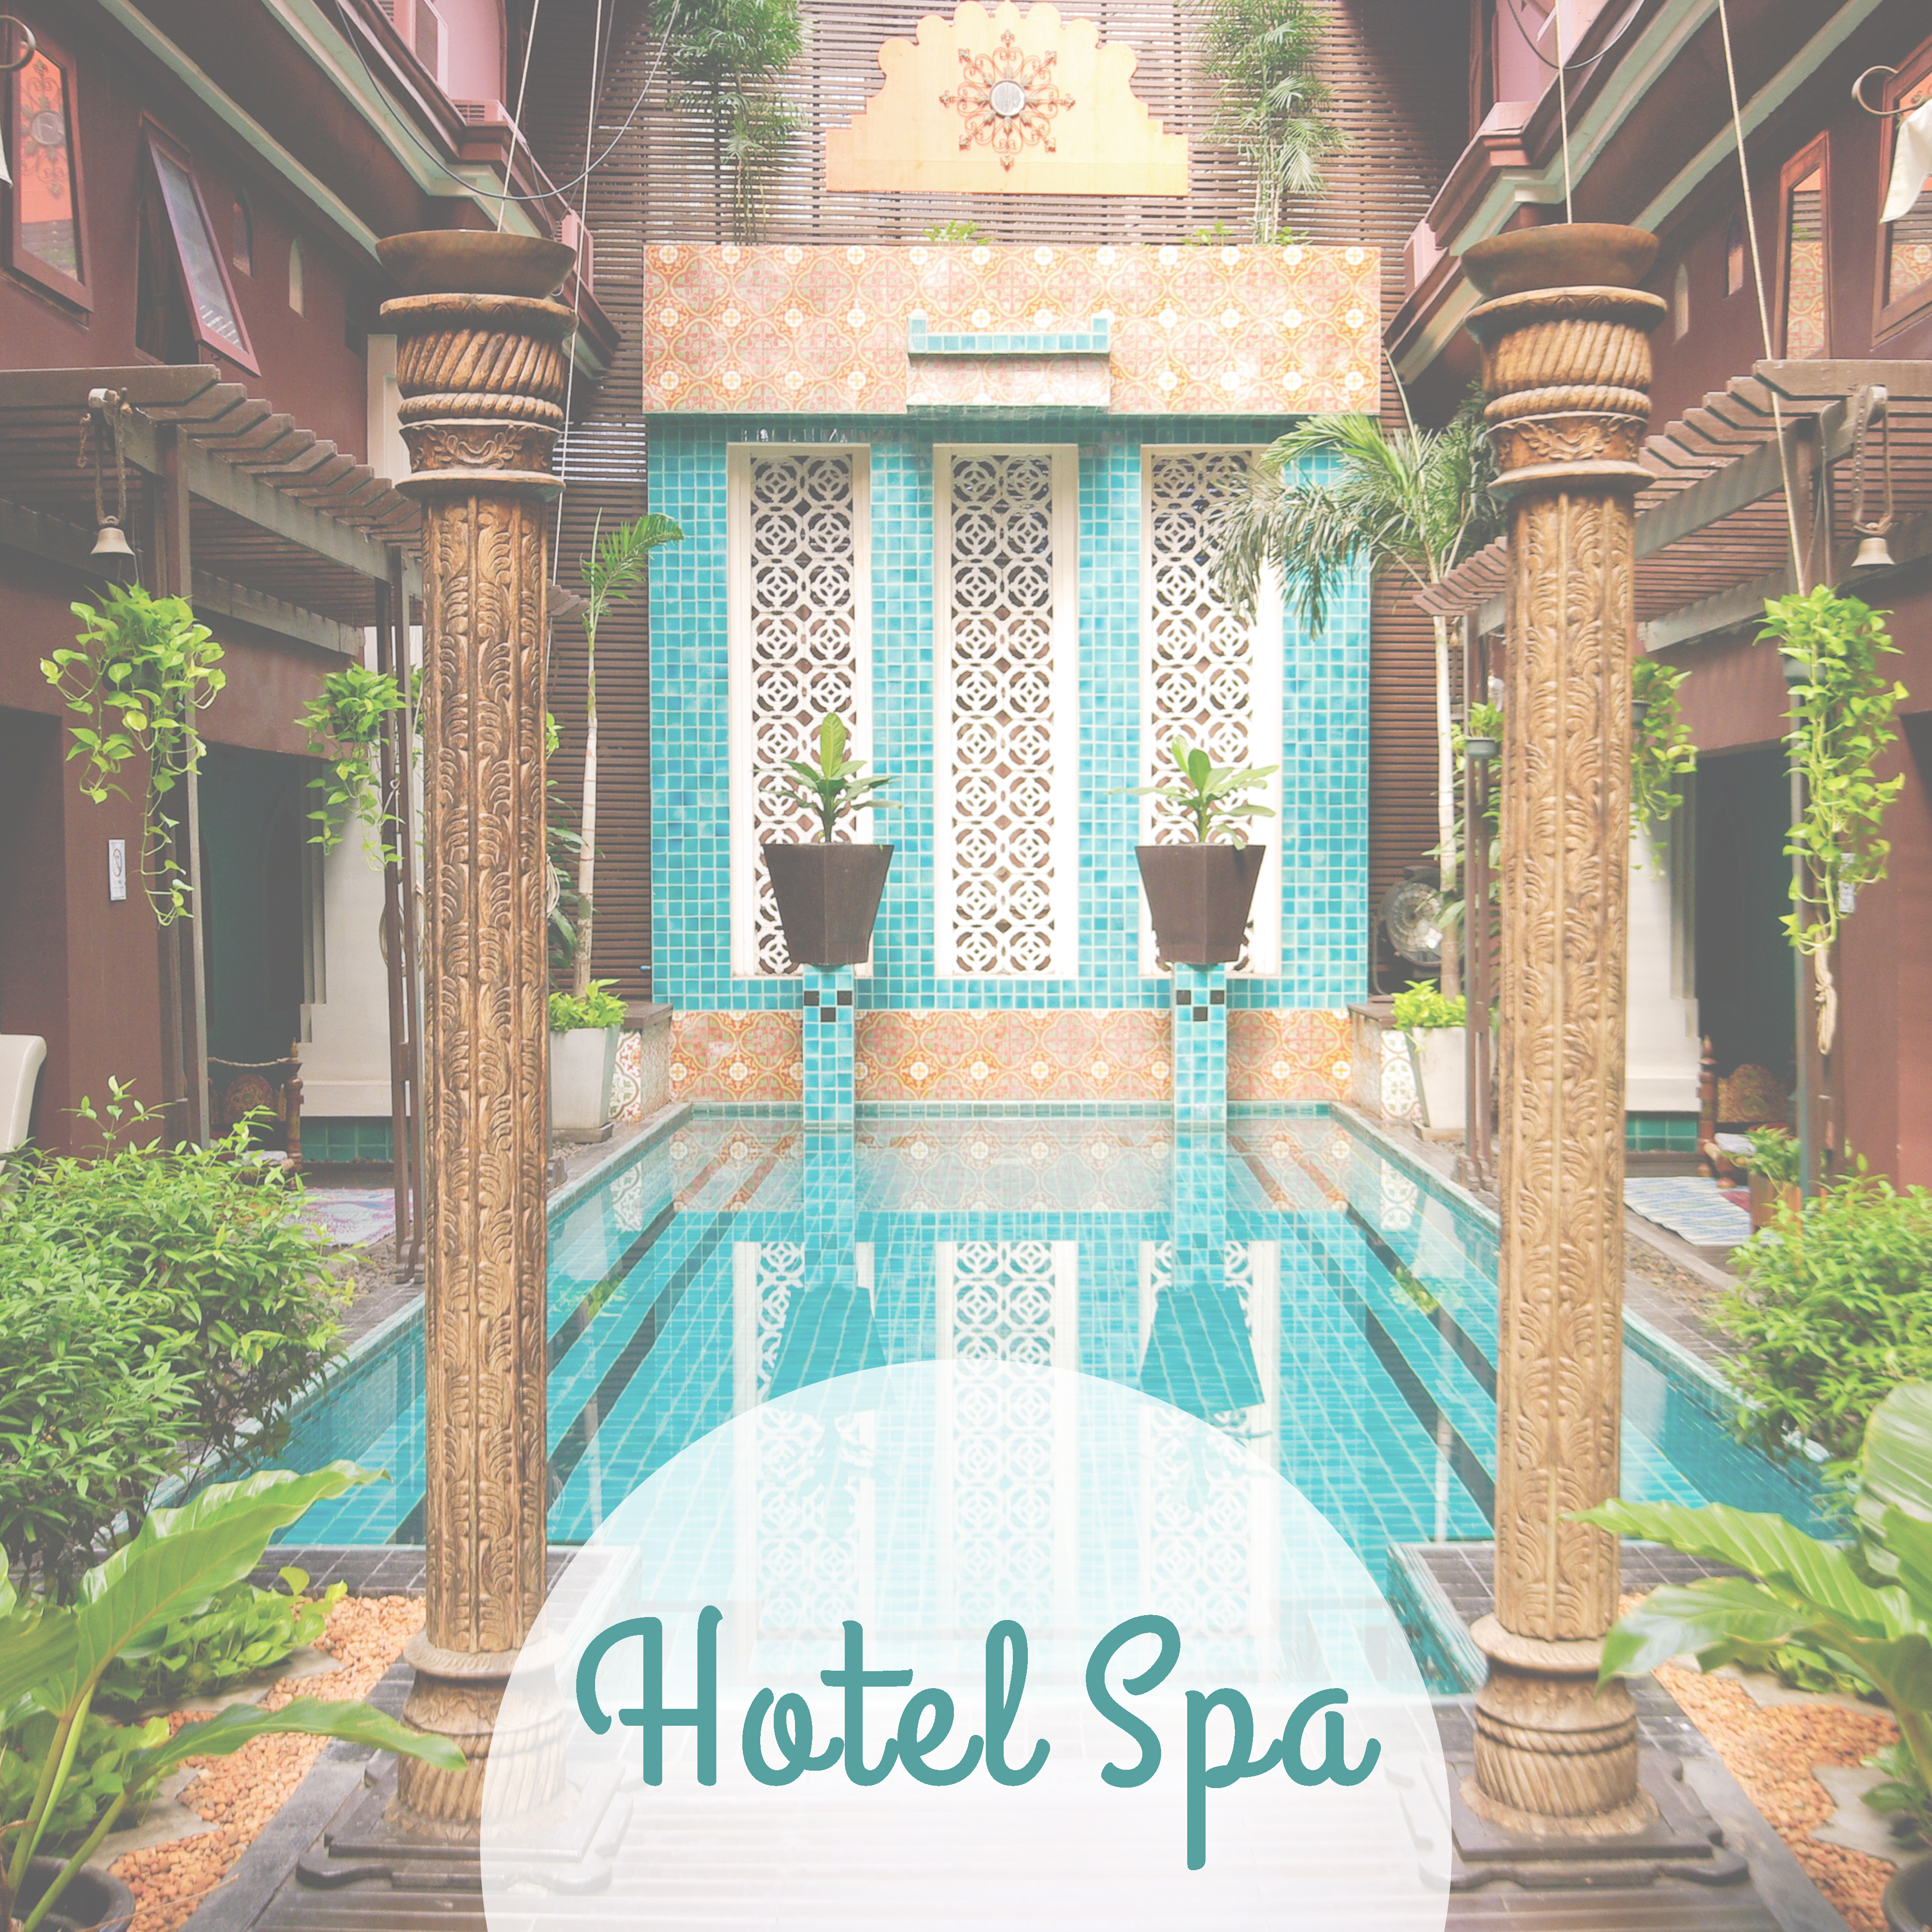 Hotel Spa  15 Relaxing Songs for Massage, Sleep, Wellness, Pure Mind, Bliss Spa, Soft Music